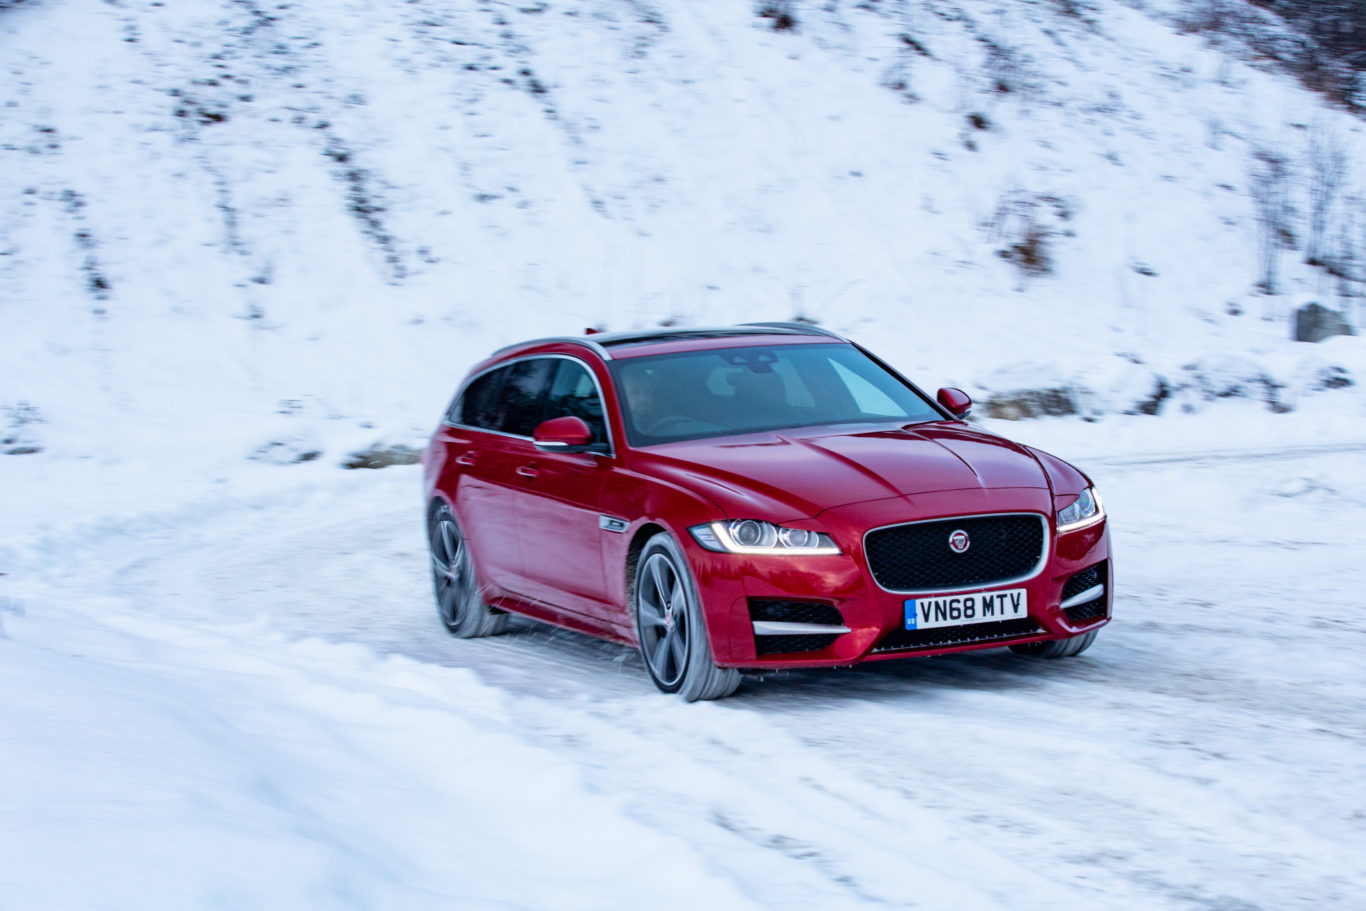 The Sportbrake goes up against the likes of the BMW 5 Series Touring and Audi A6 Avant